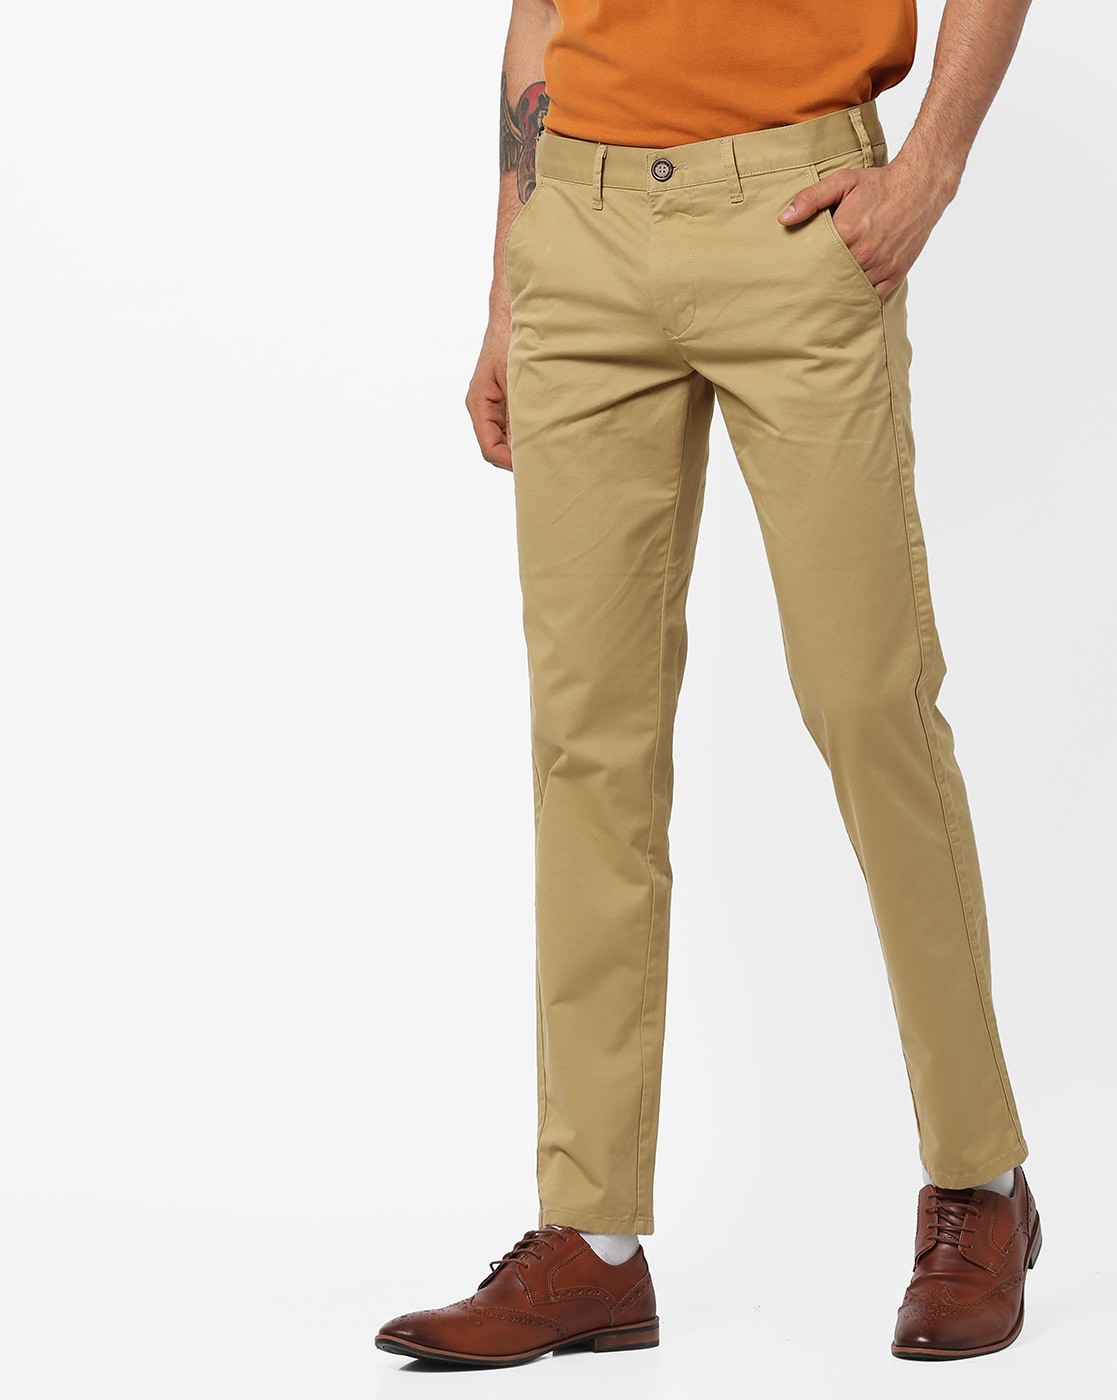 GS78 solid grey color trouser - G3-MCT0673 | G3fashion.com